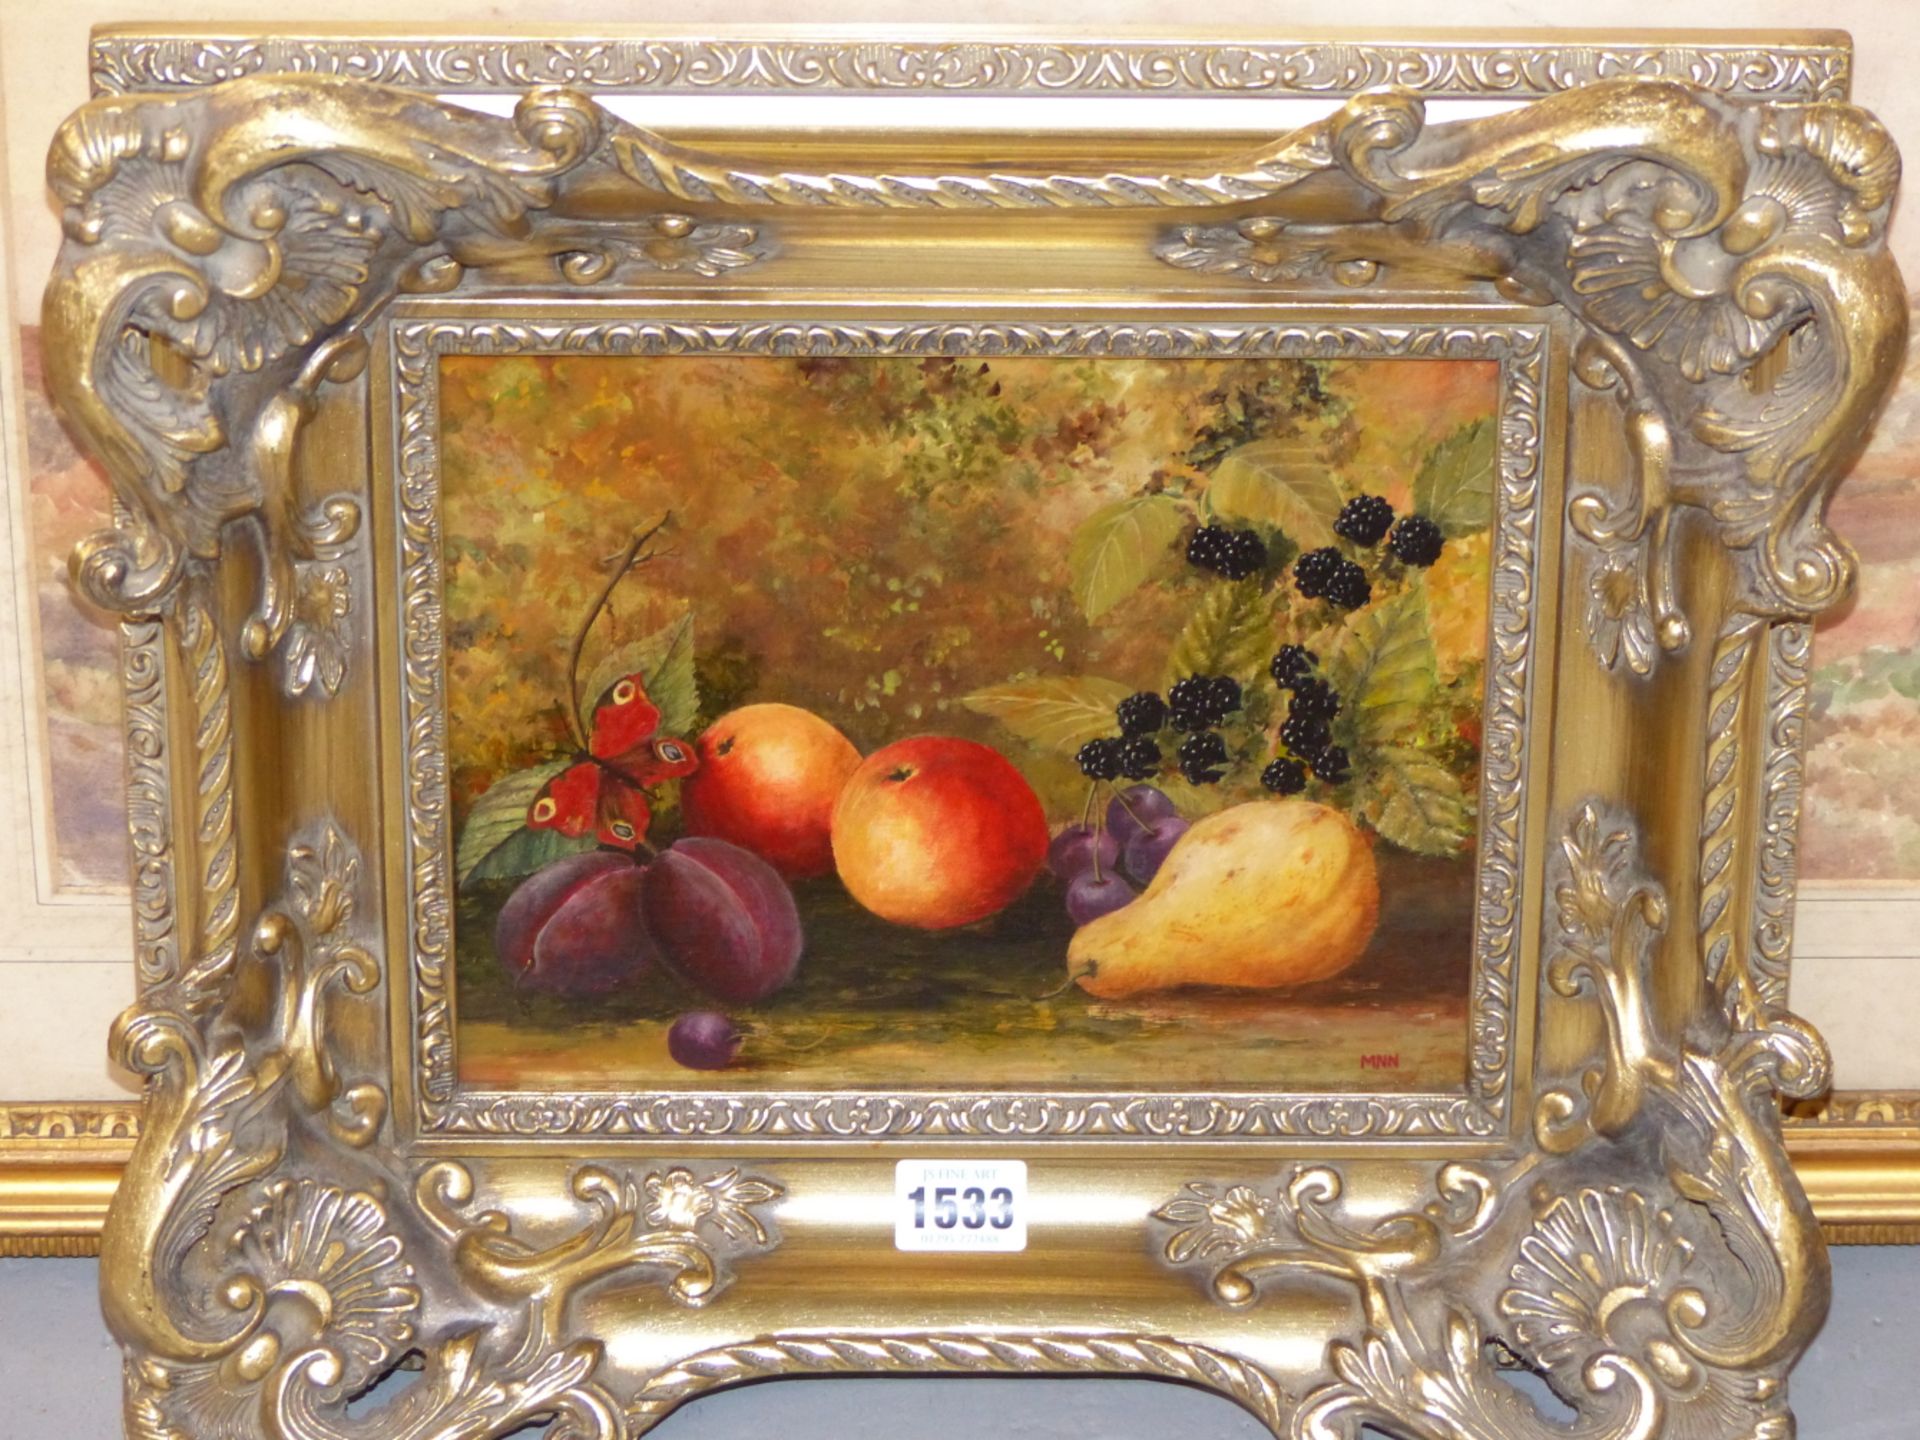 MARTIN NASH (CONTEMPORARY SCHOOL) A DECORATIVE STILL LIFE PAINTING, INITIALLED, OIL ON BOARD. 20 x - Image 4 of 4